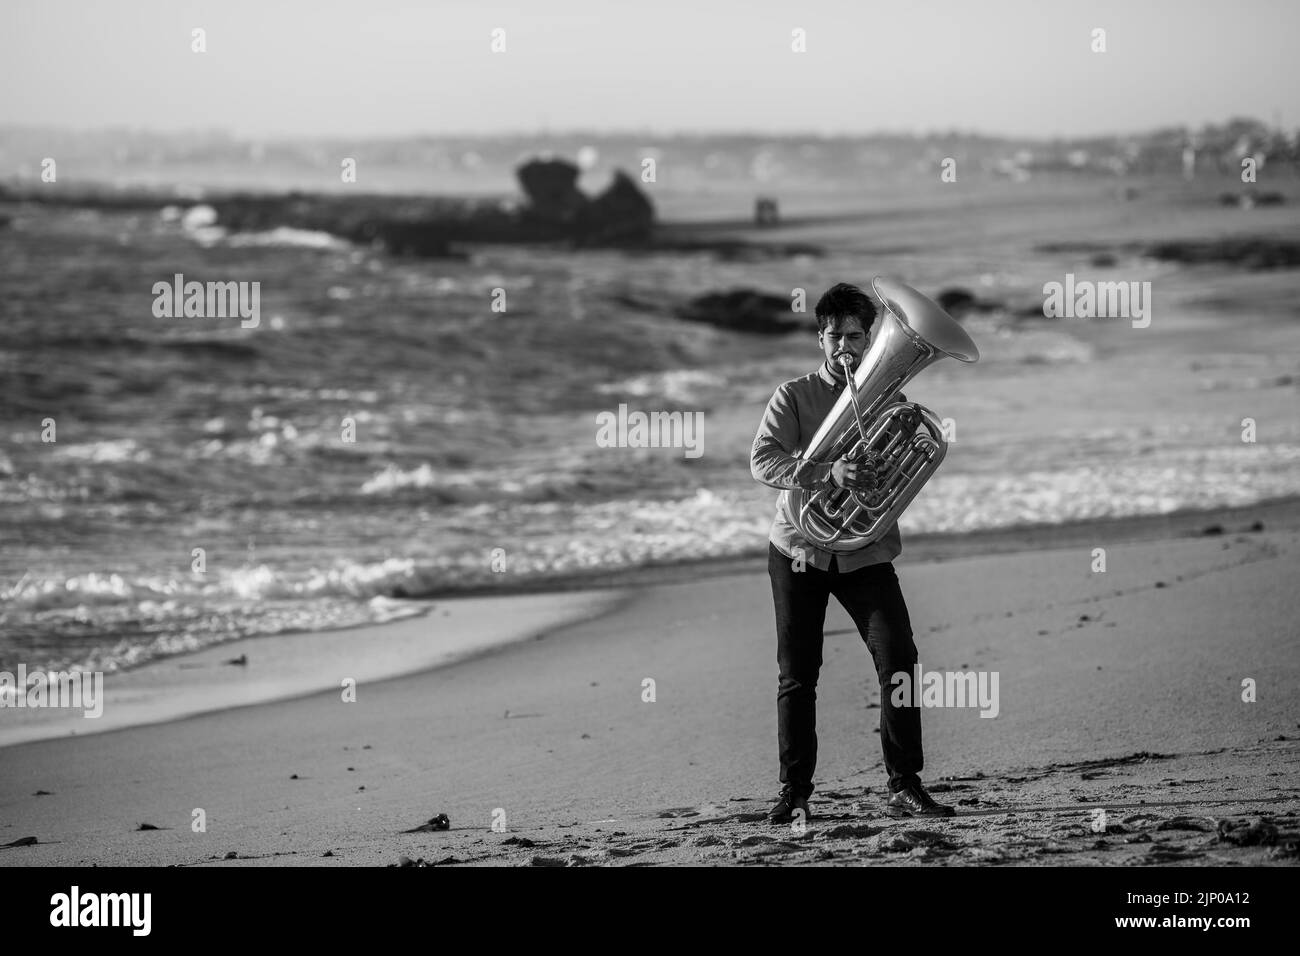 A musician playing a tuba on the Atlantic beach. Black and white photo. Stock Photo